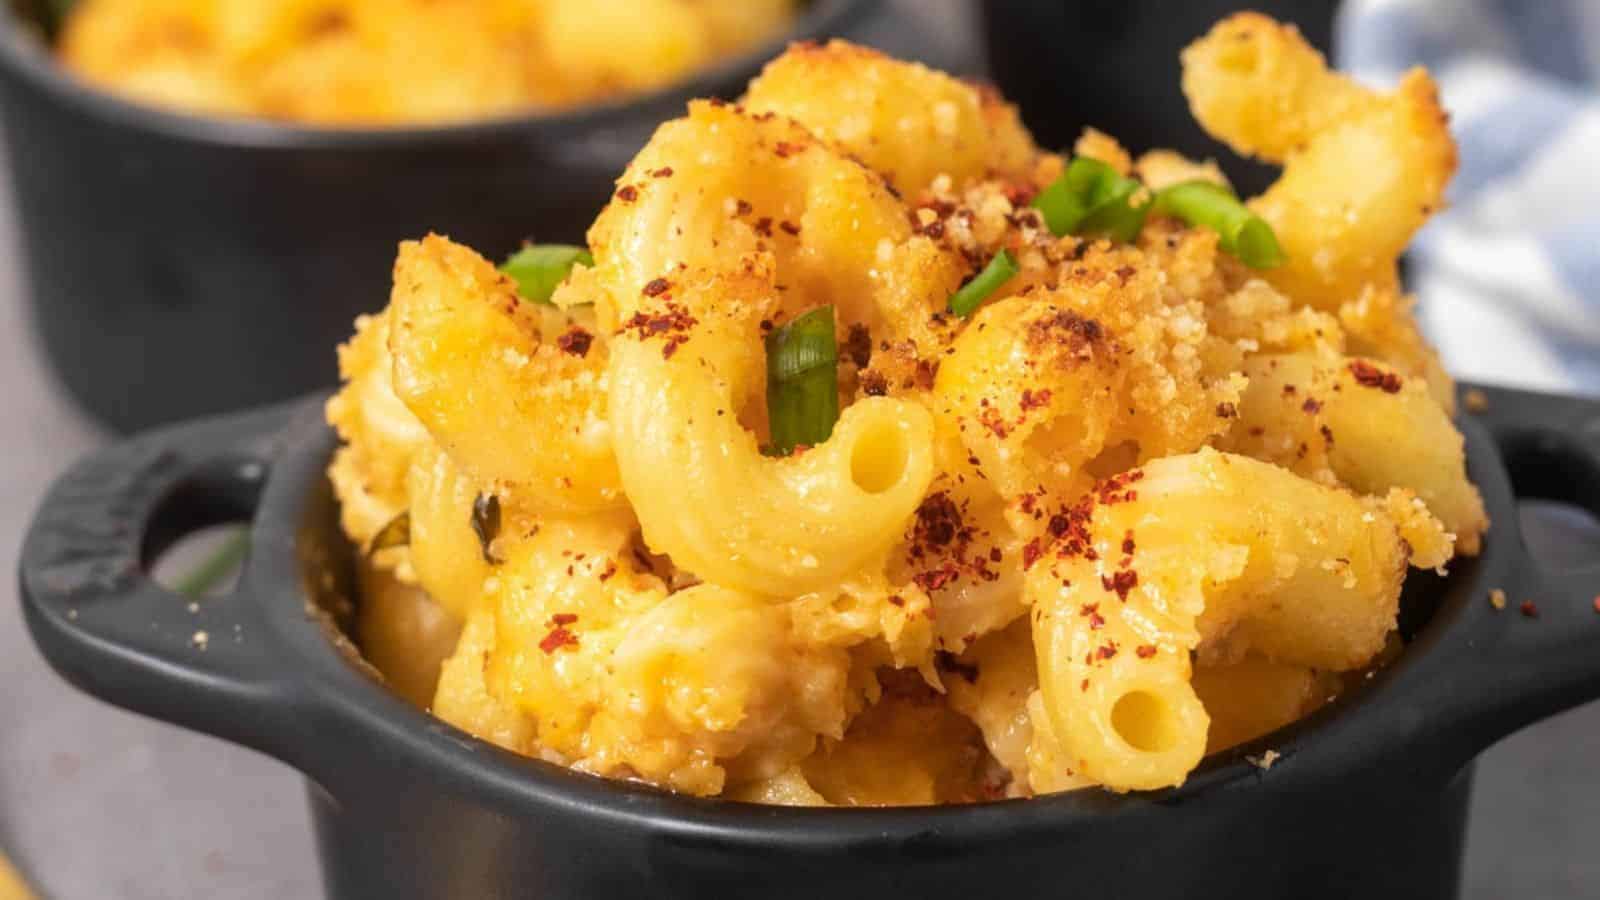 A close up image of kimchi mac and cheese in a cocotte.